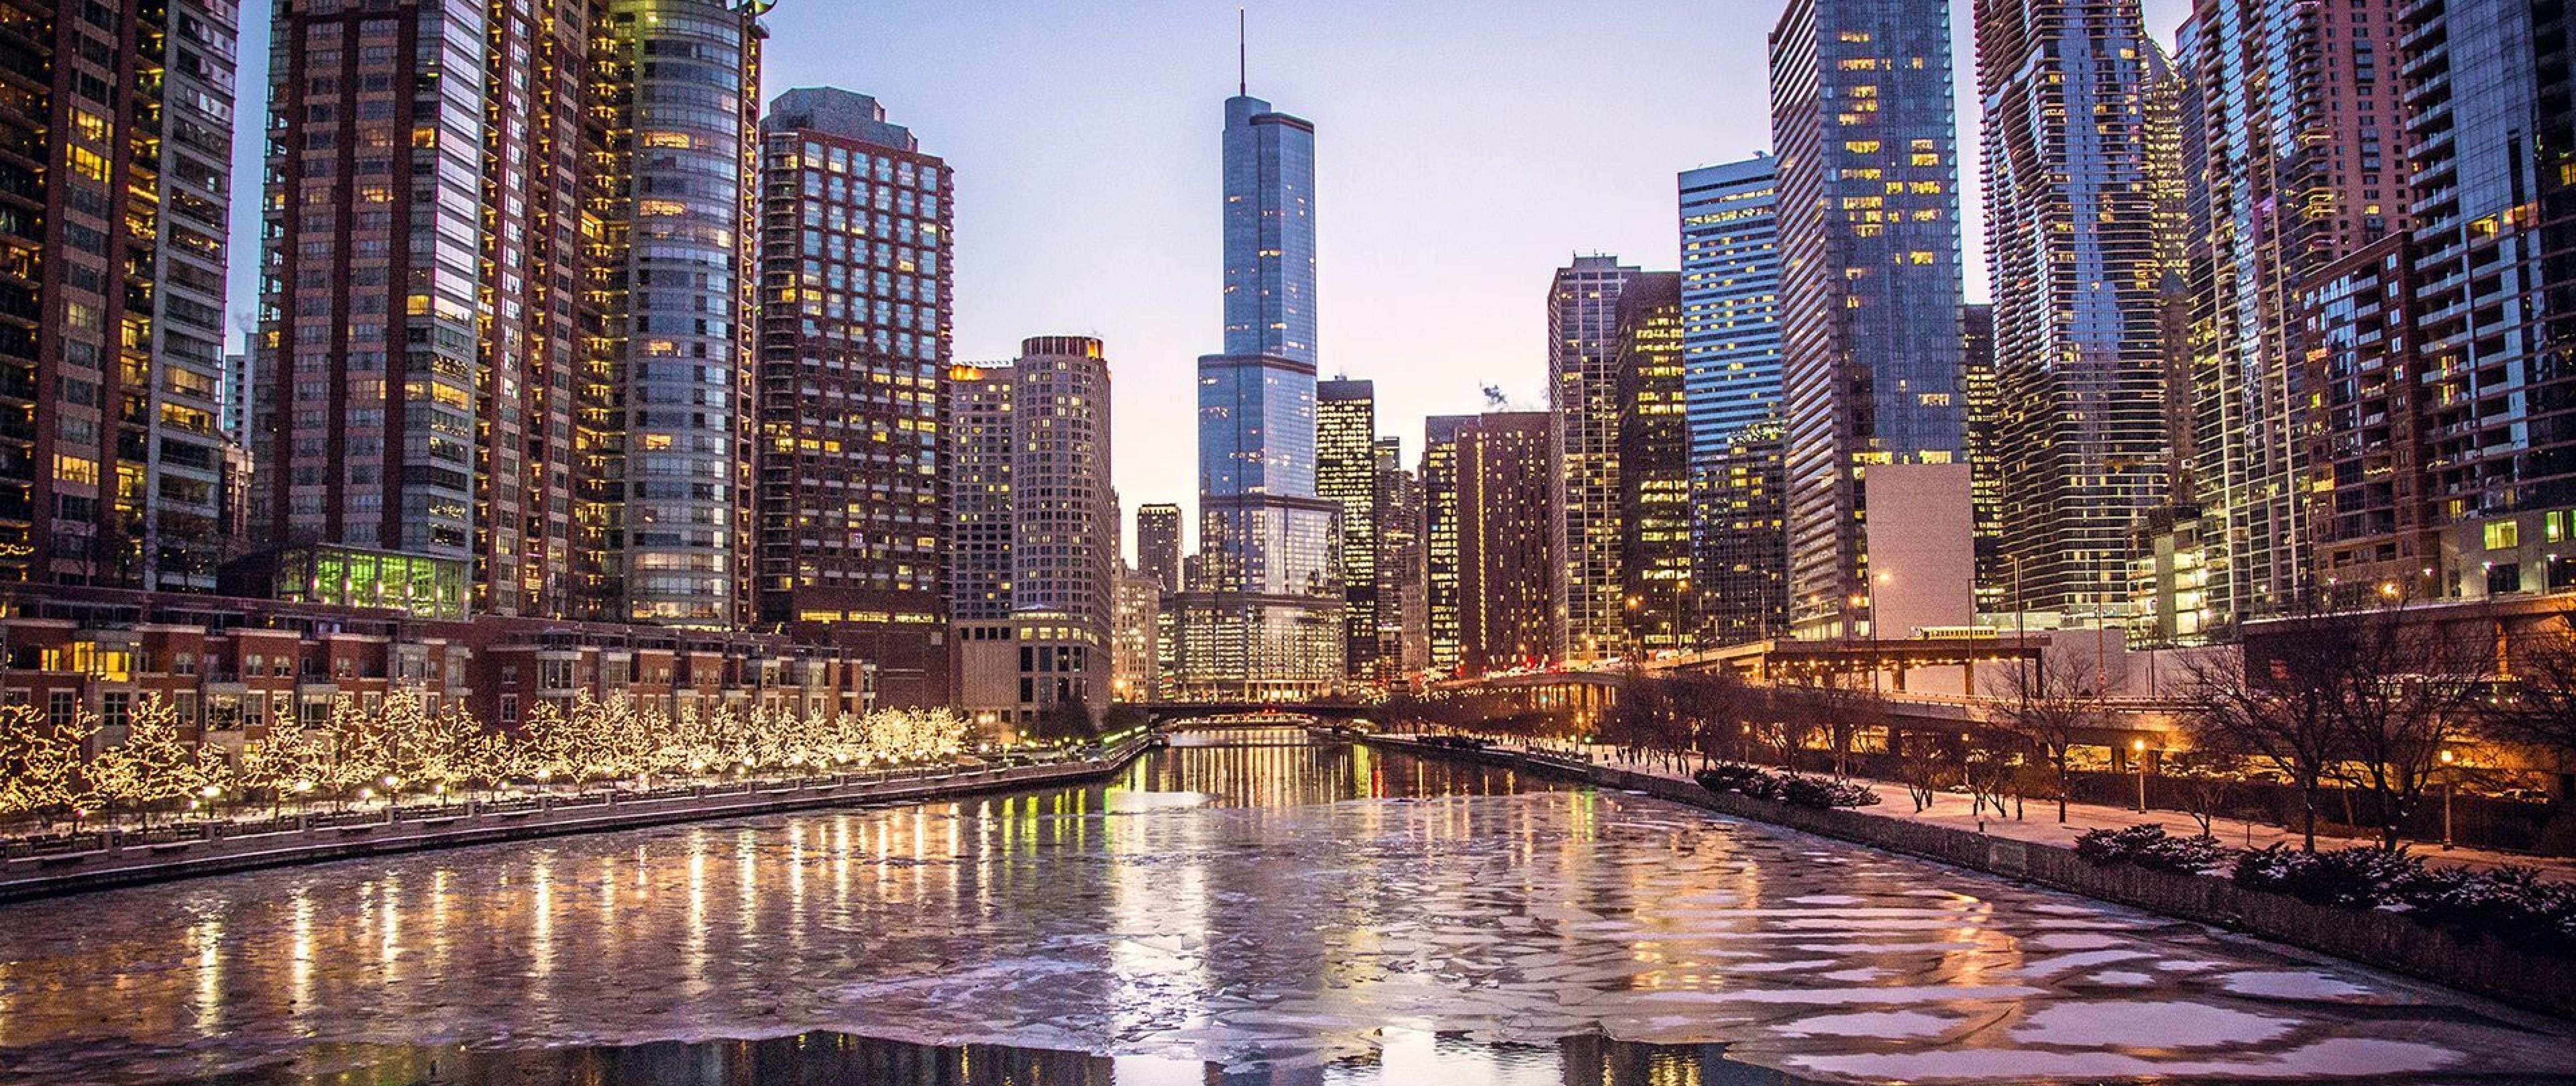 Chicago City Wallpaper For Desktop And Mobiles 4k Ultra HD Wide Tv